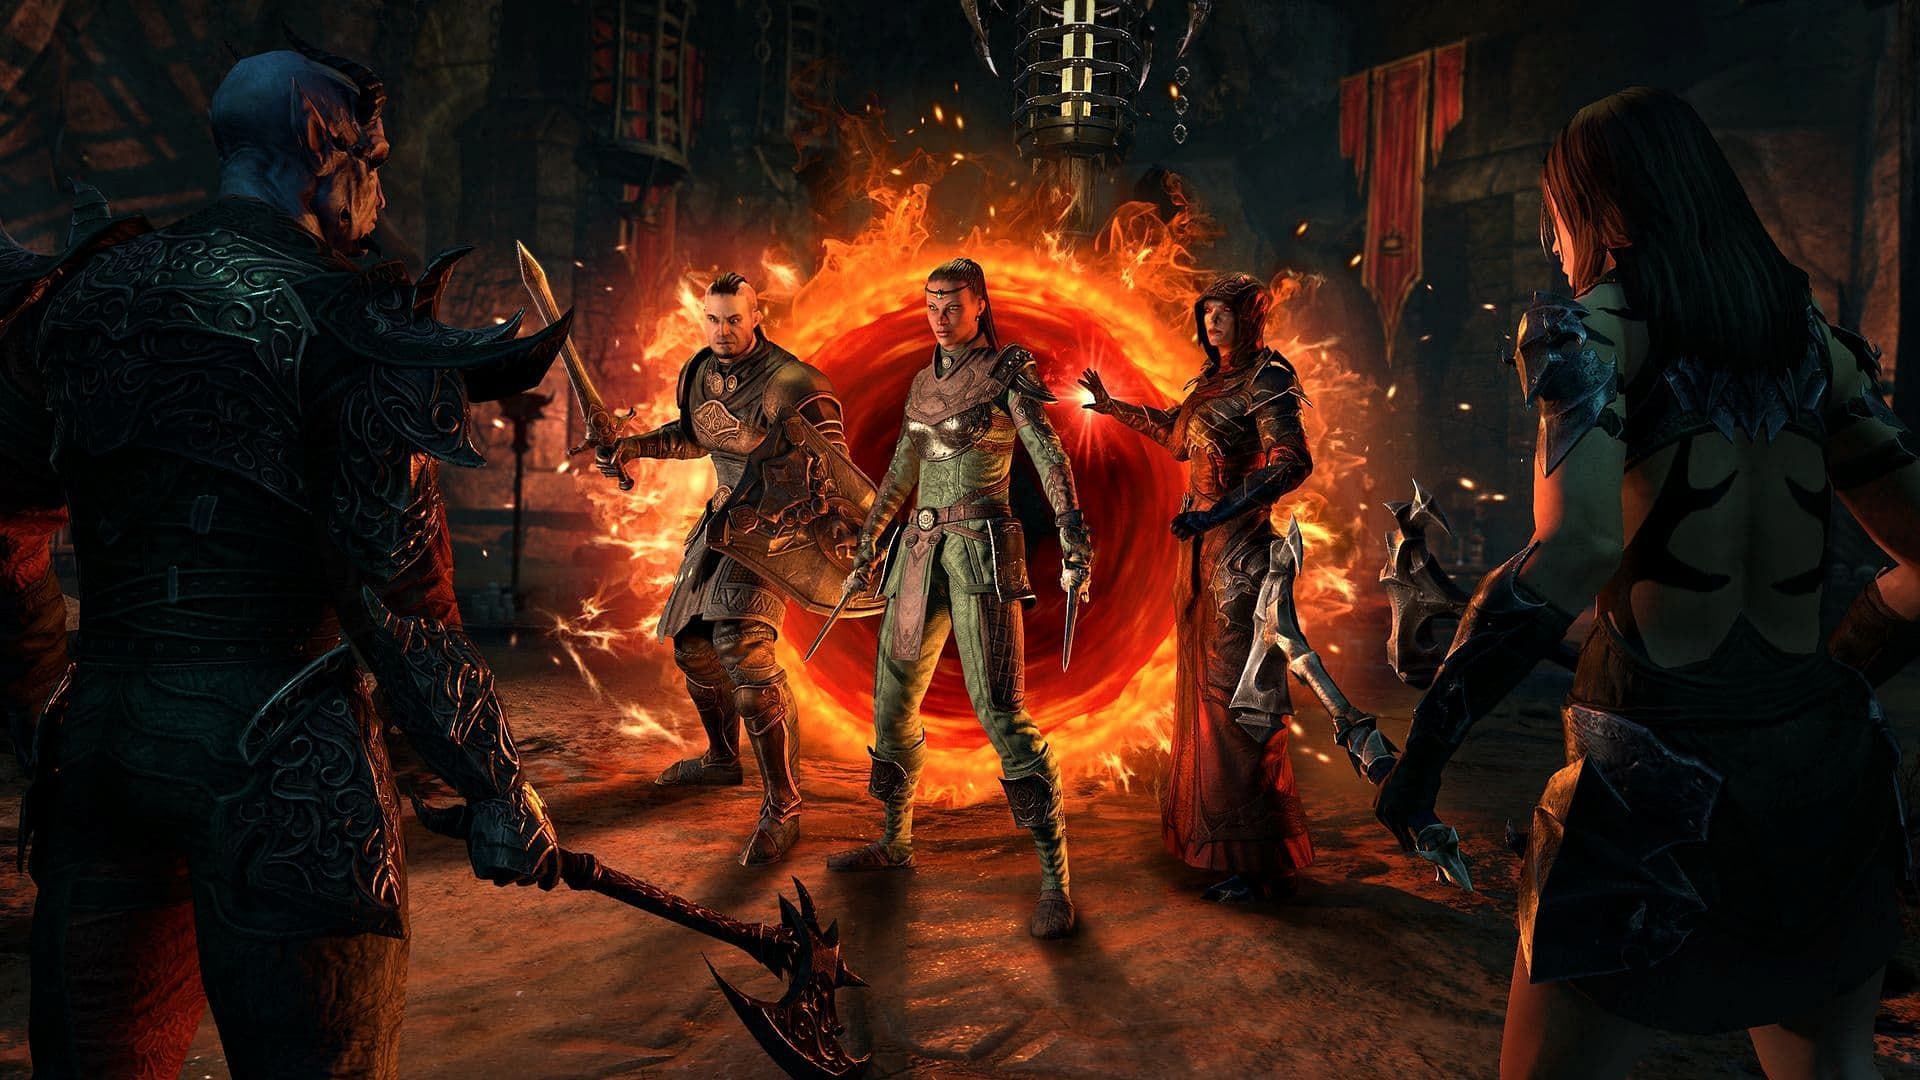 Players battling enemies in The Elder Scrolls Online while standing in front of a portal